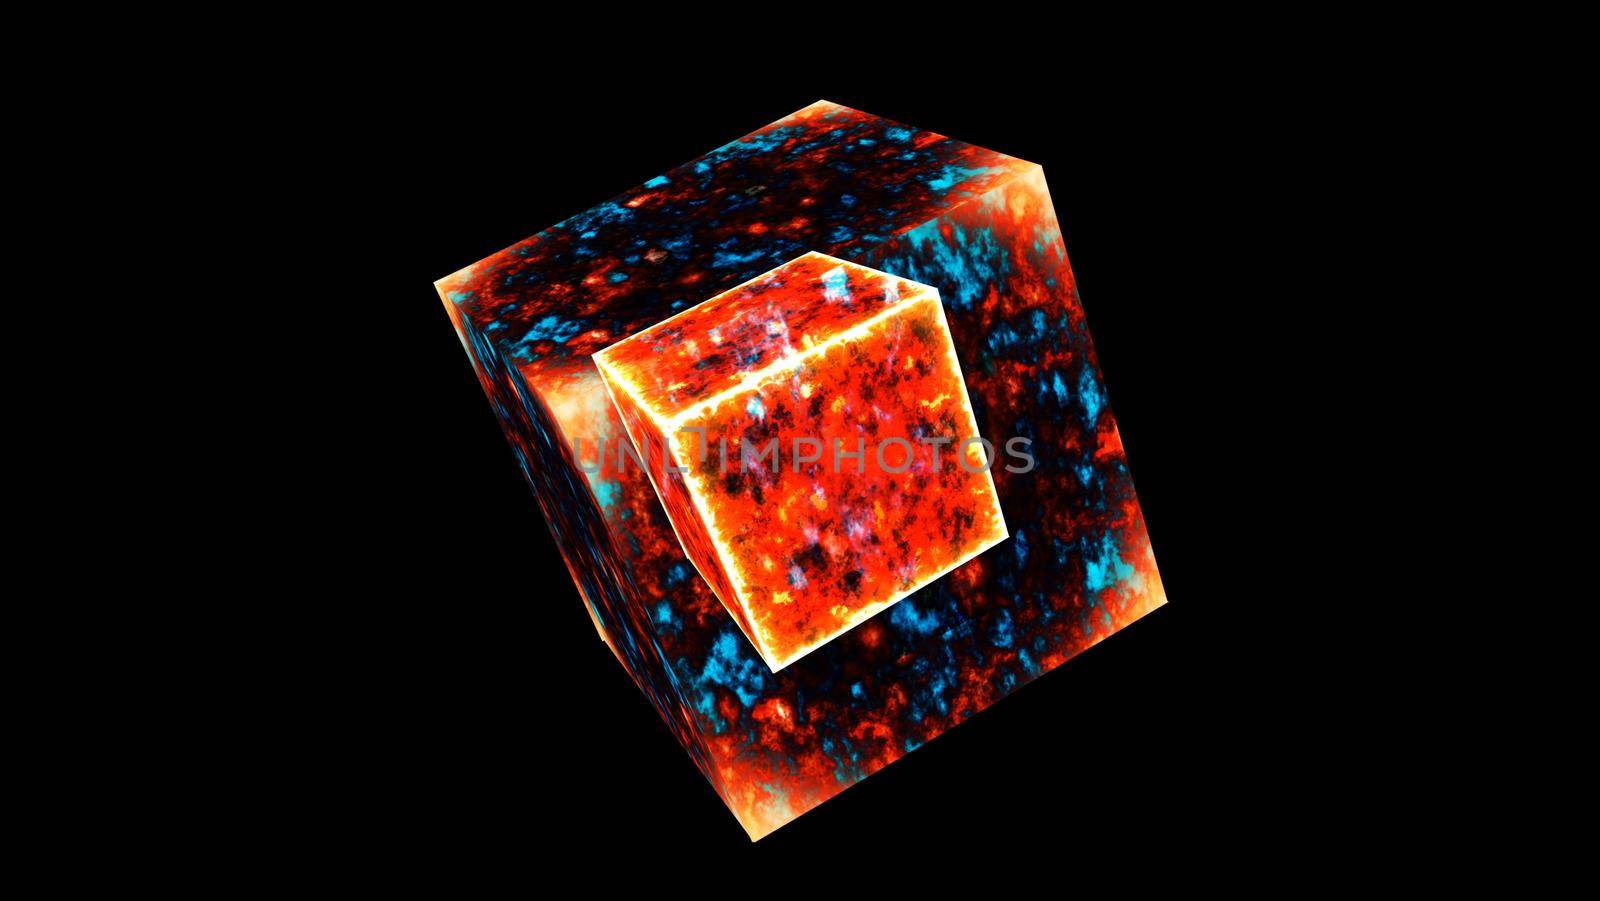 Eternal flame power overwhelming cube mystery energy surface and powerful eternal cube fire core on black background